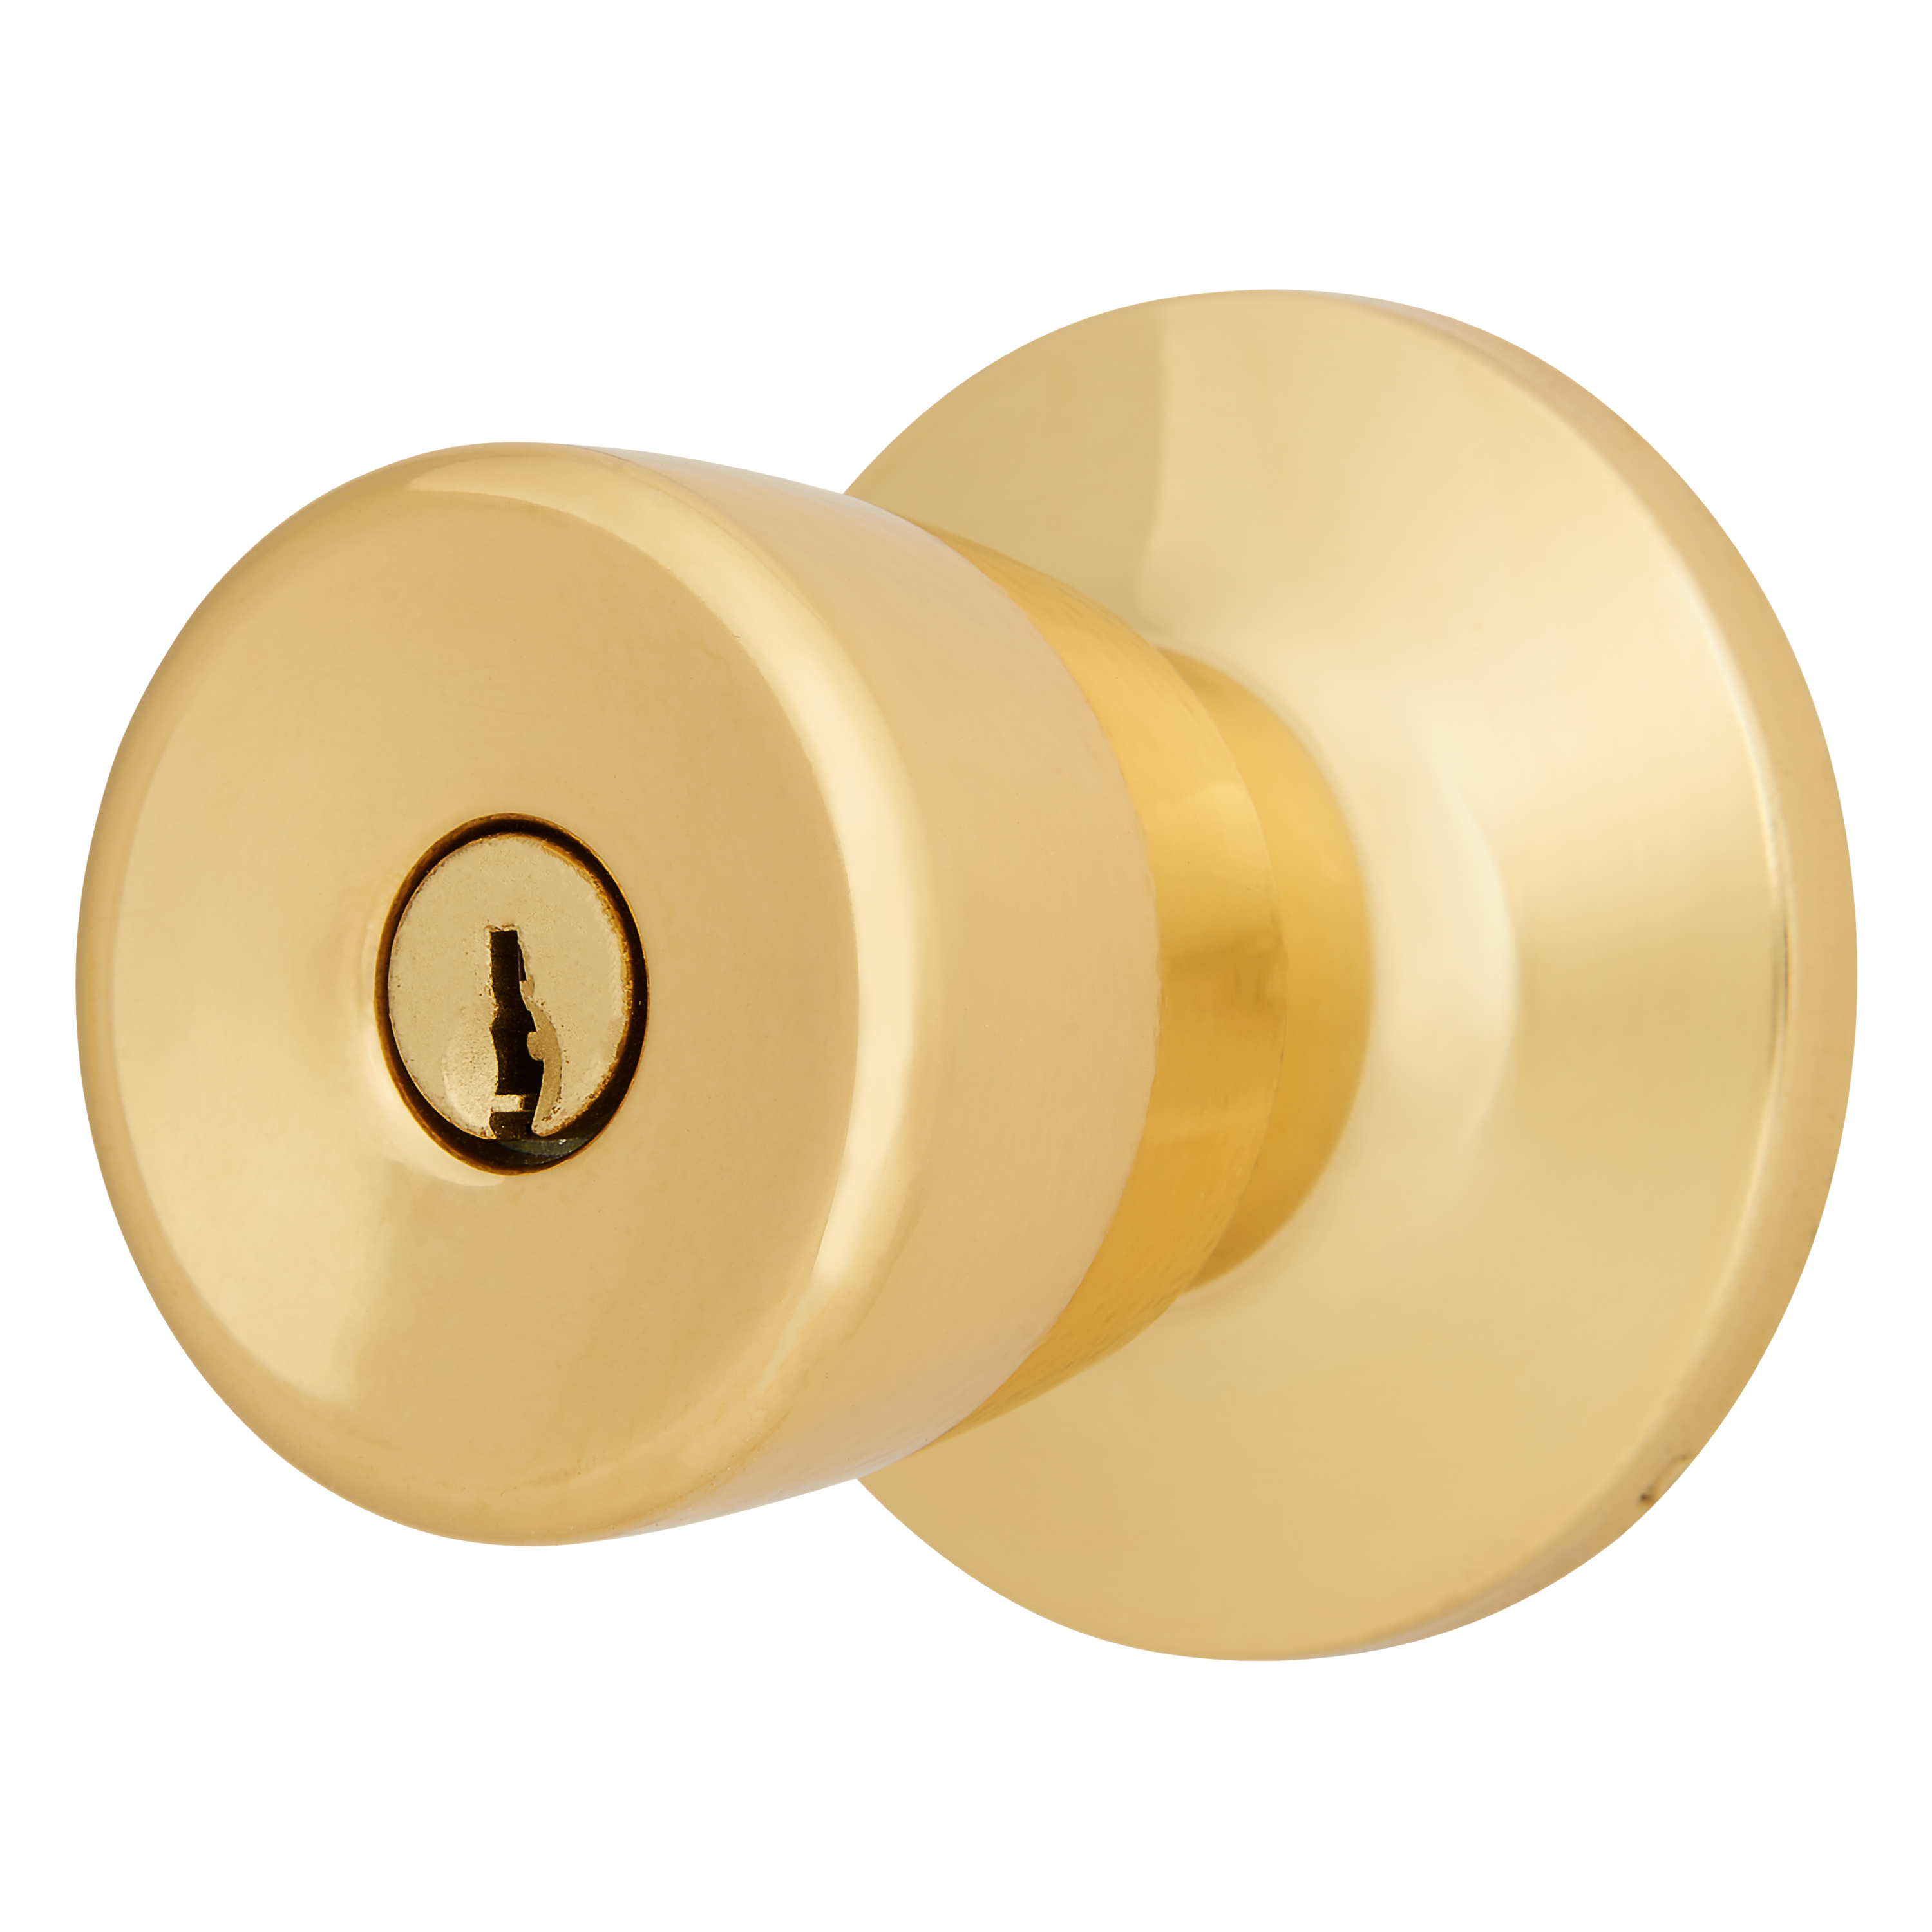 Brinks, Keyed Entry, Mobile Home Bell Style Doorknob, Polished Brass Finish - image 4 of 11